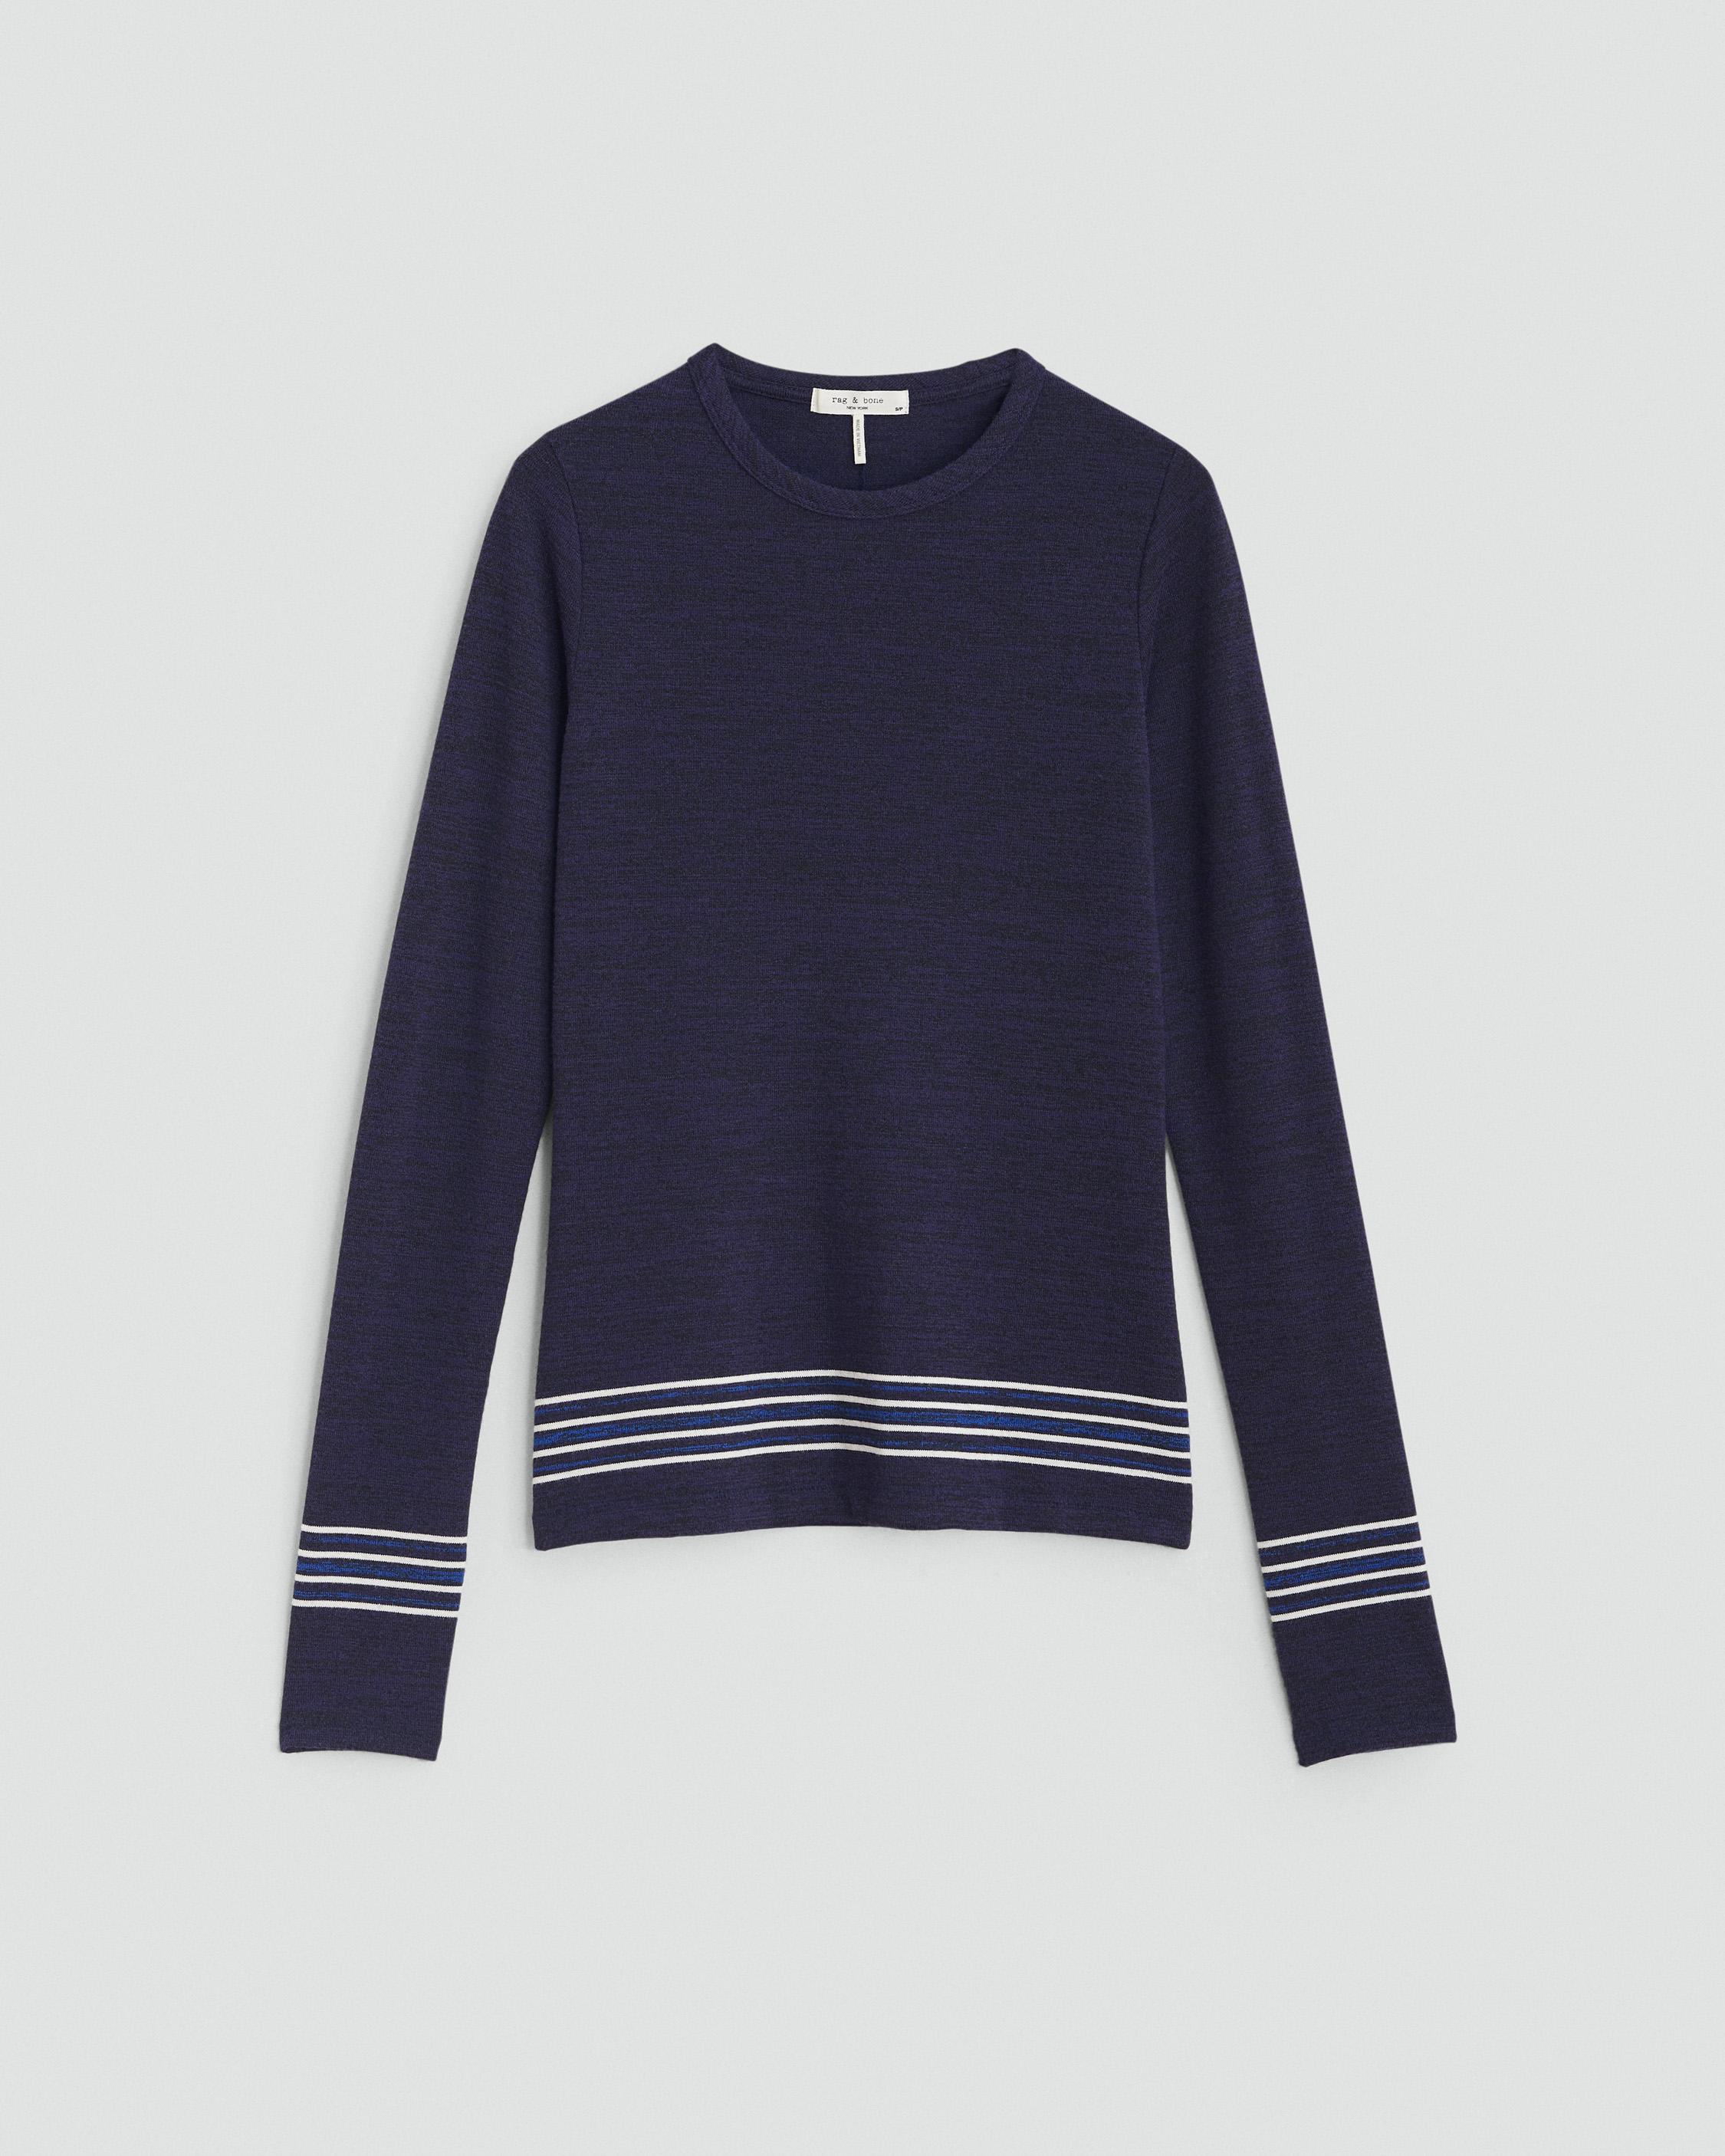 The Knit Long Sleeve